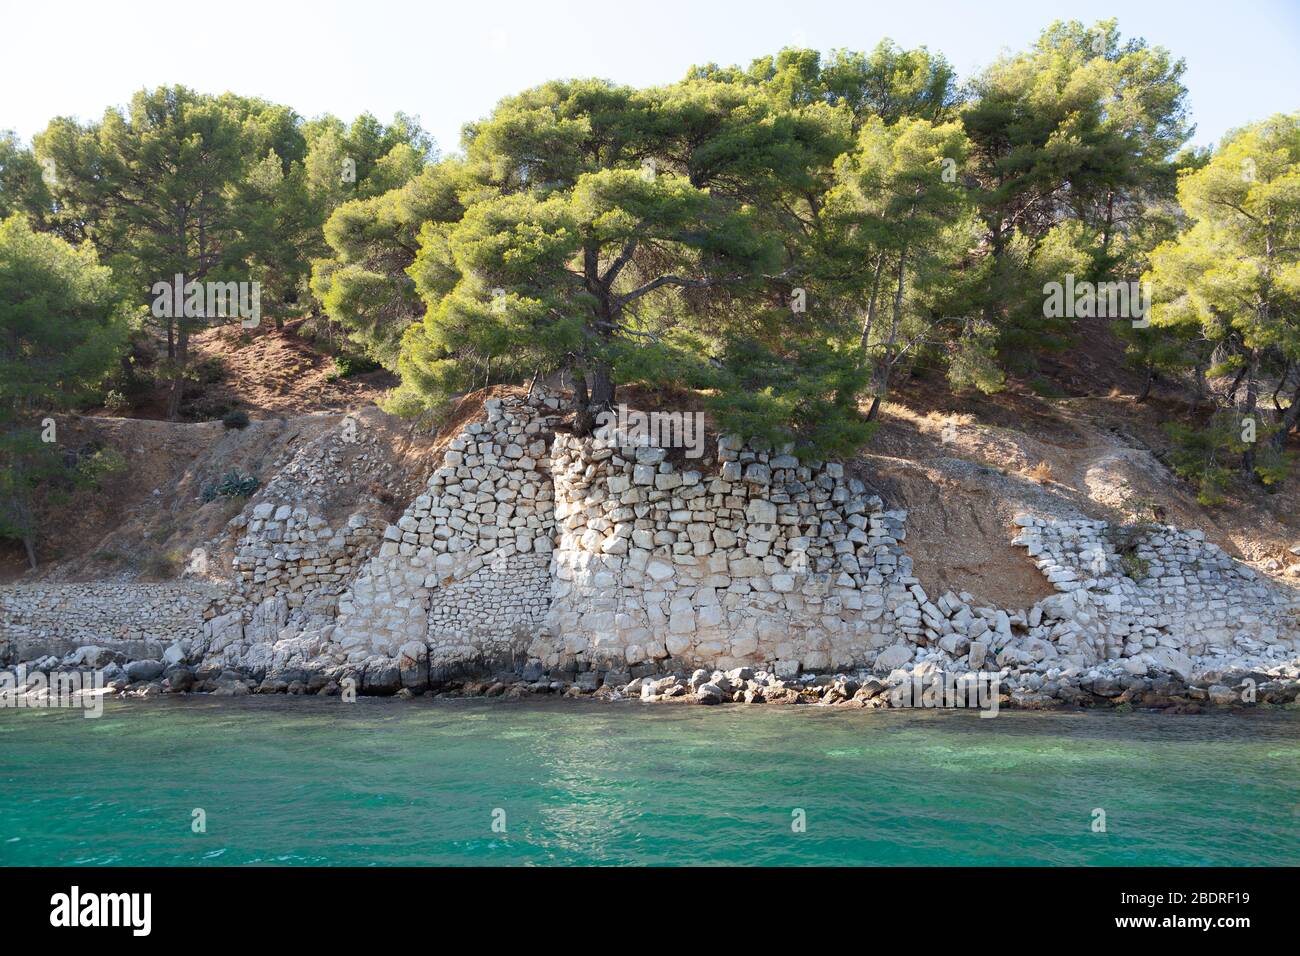 Embankment near the city of Cassis Bouches-du-Rhône, Southern France. Stock Photo